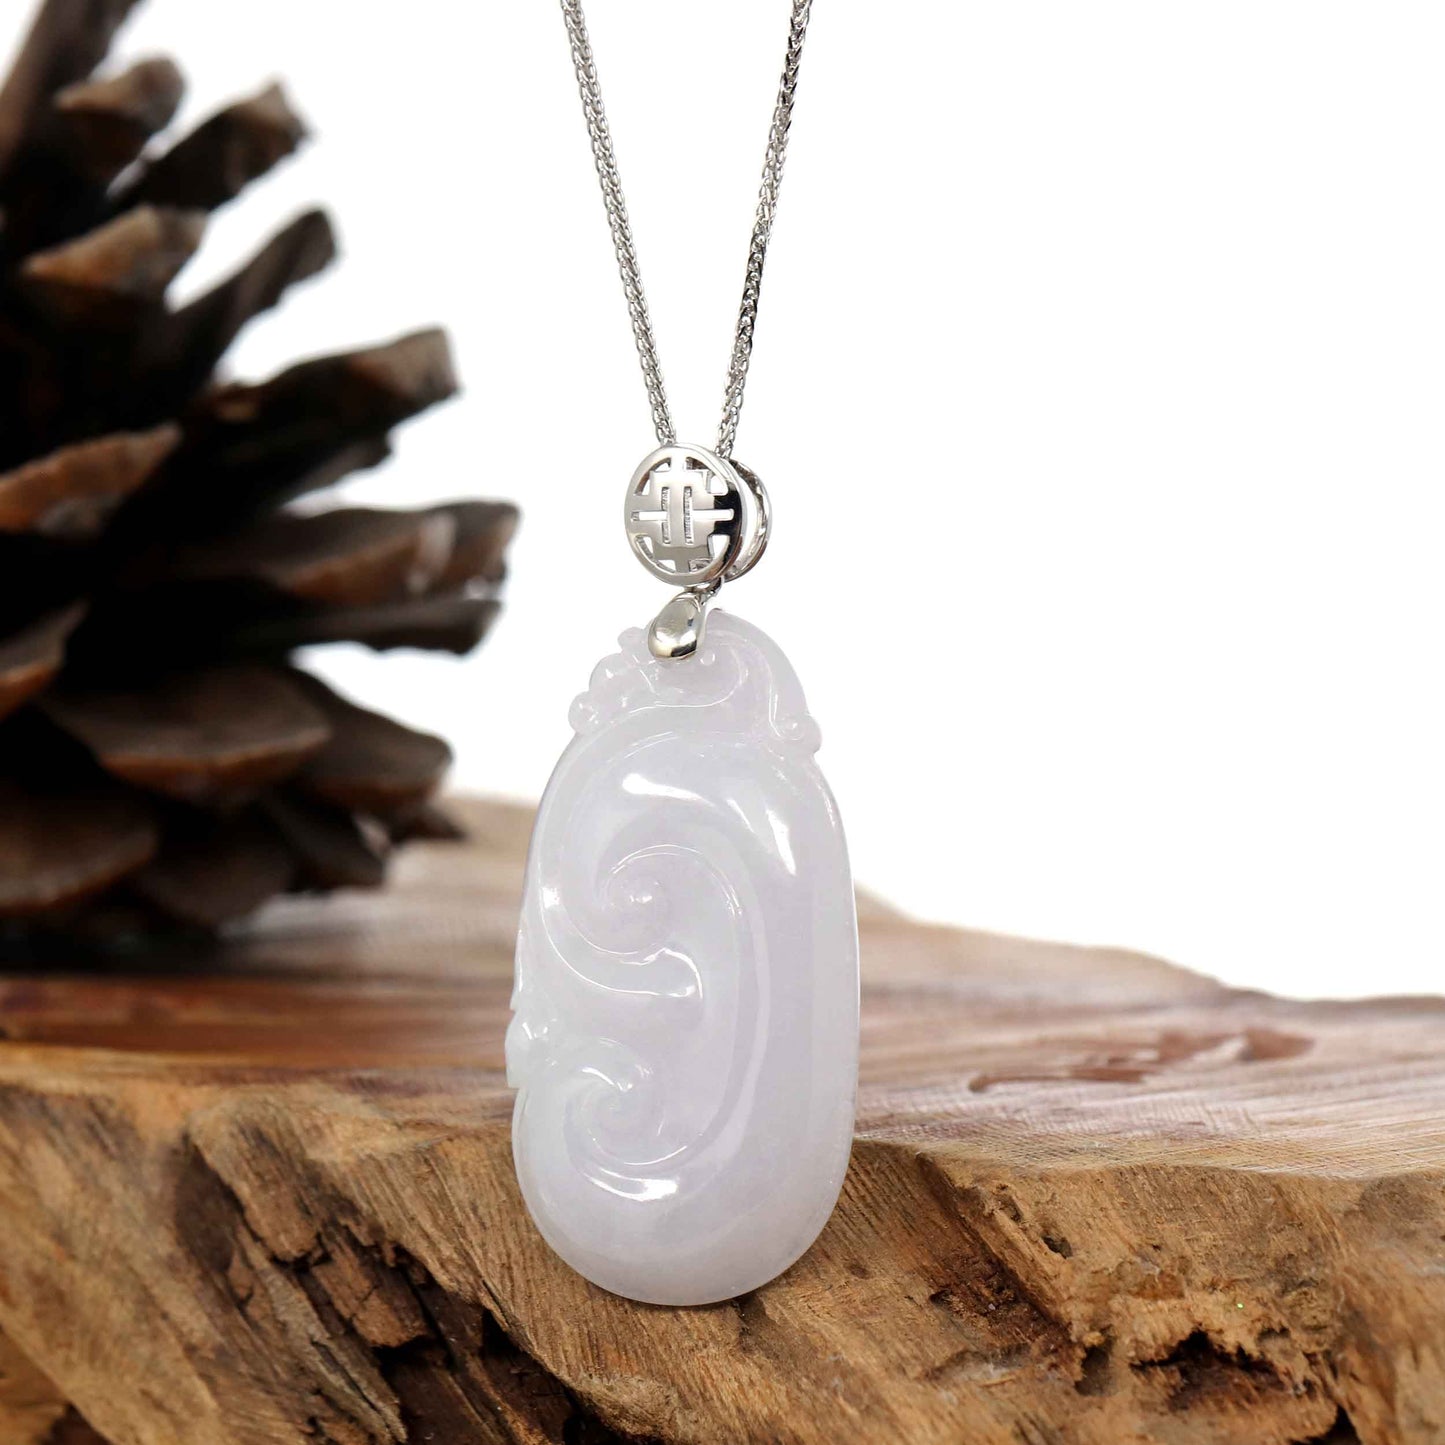 RealJade Co.® Jade Guanyin Pendant Necklace Copy of Genuine Lavender Jadeite Jade Ru Yi Pendant Necklace With Sterling Silver Bail